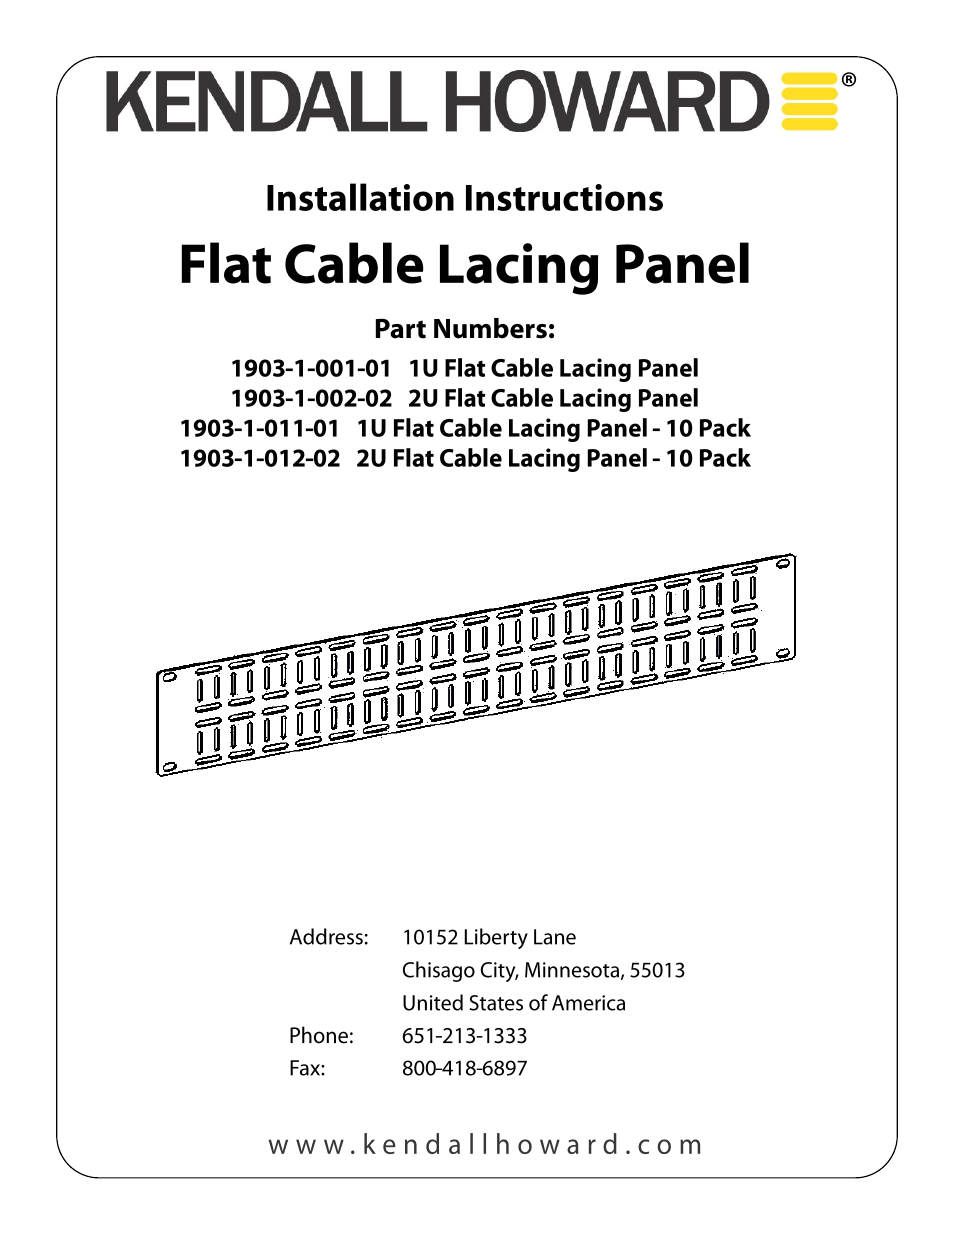 1903-1-0xx-0x Flat Cable Lacing Panel